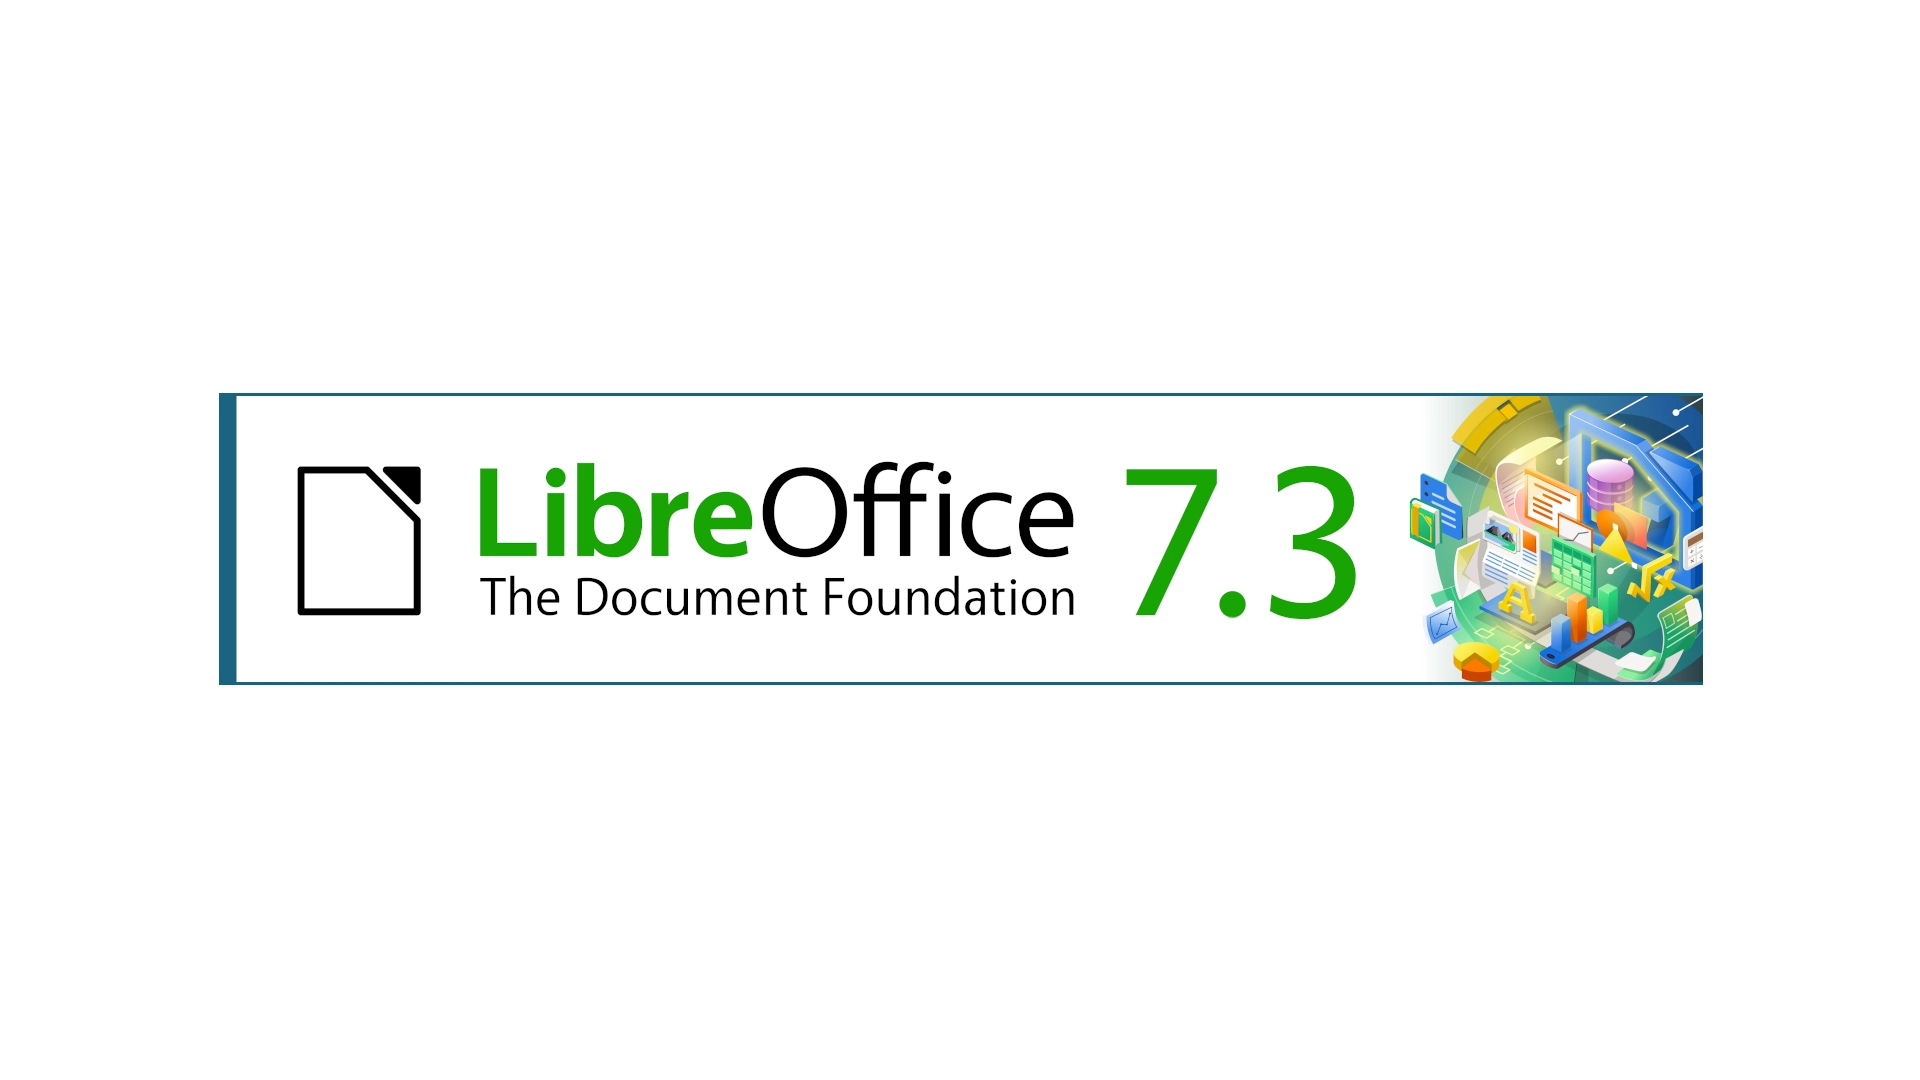 LibreOffice 7.3.4 Is Now Available for Download, More Than 85 Bugs Fixed